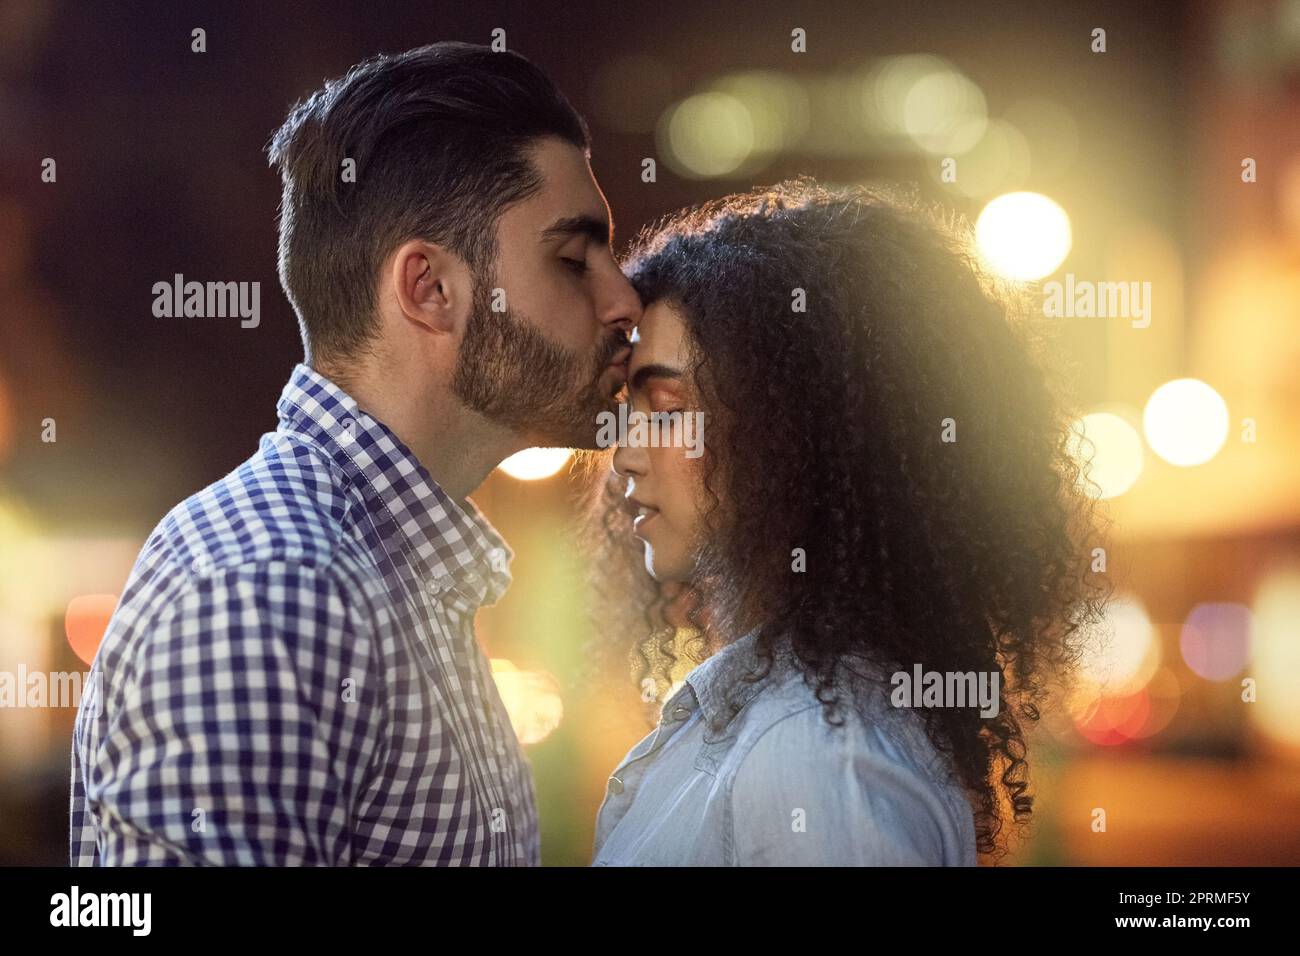 The perfect end to the perfect night. an affectionate young couple out on a date in the city. Stock Photo